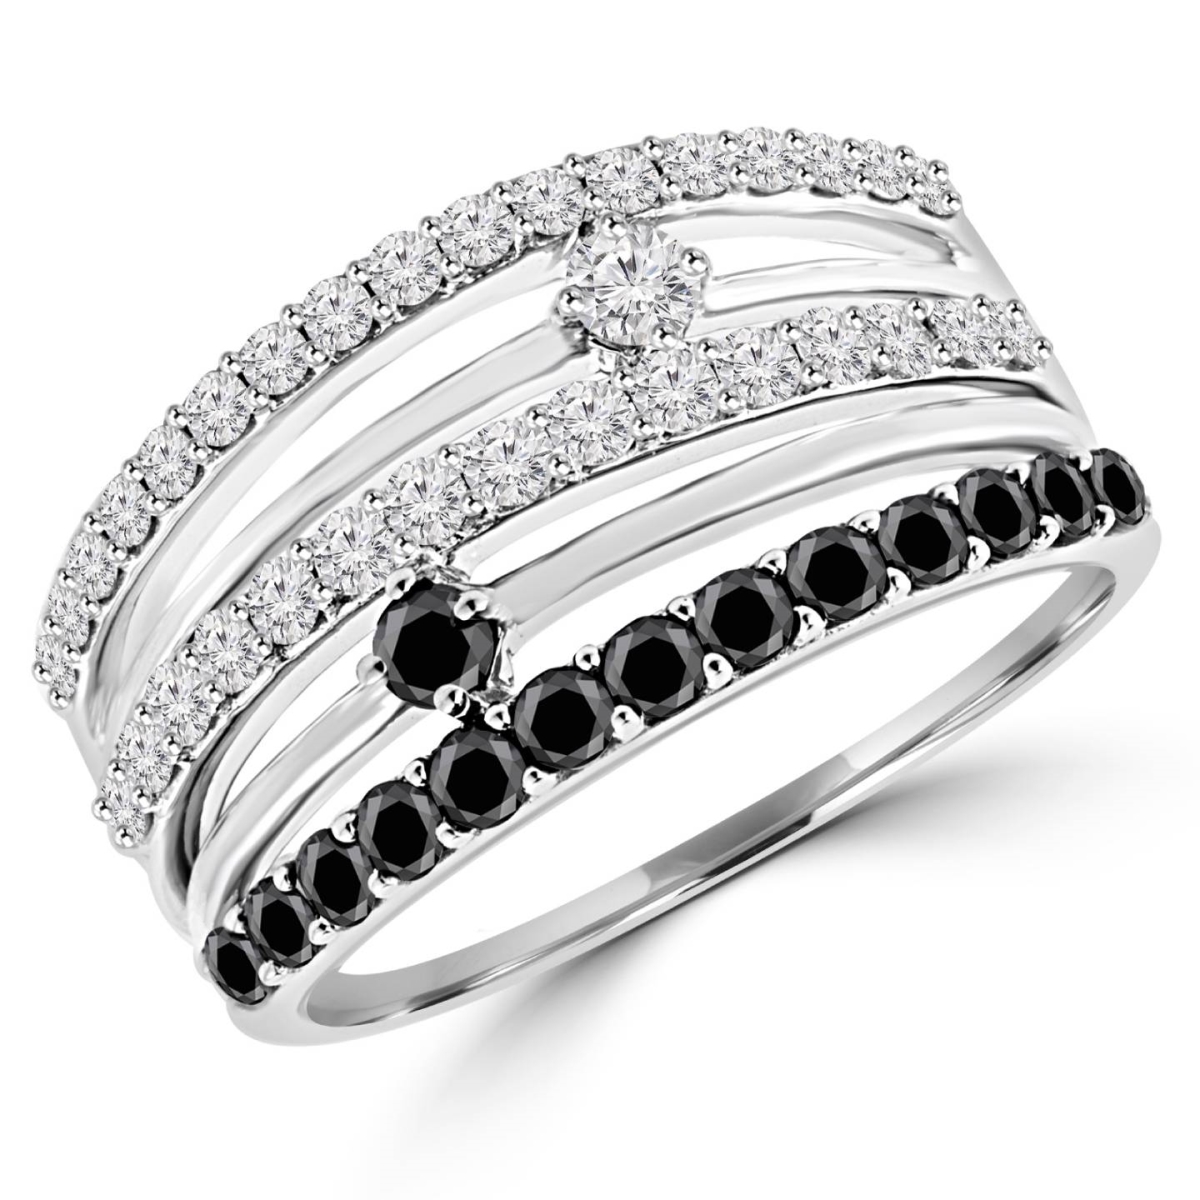 Picture of Majesty Diamonds MDR140107-9 0.8 CTW 5-Row Black & White Diamond Fashion Cocktail Ring in 14K White Gold - Size 9